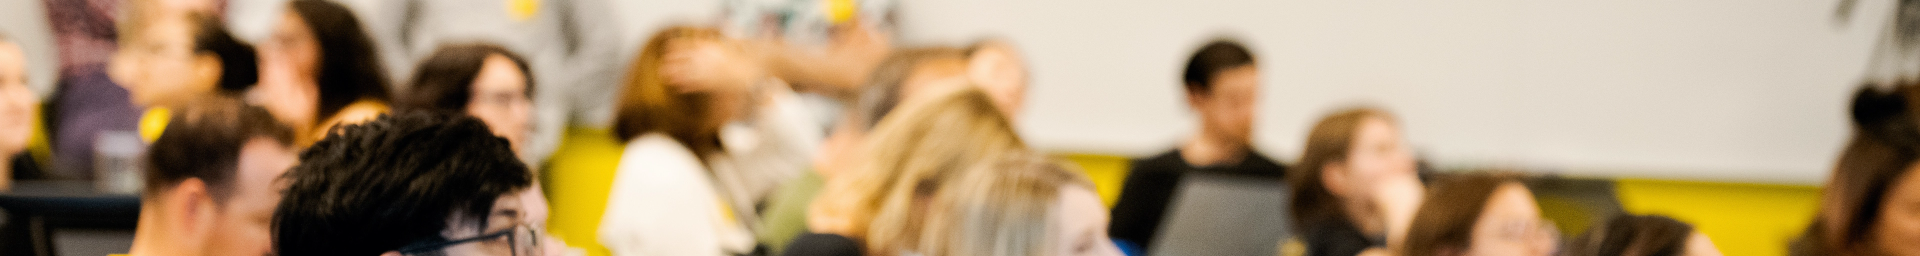 students in a classroom environment 